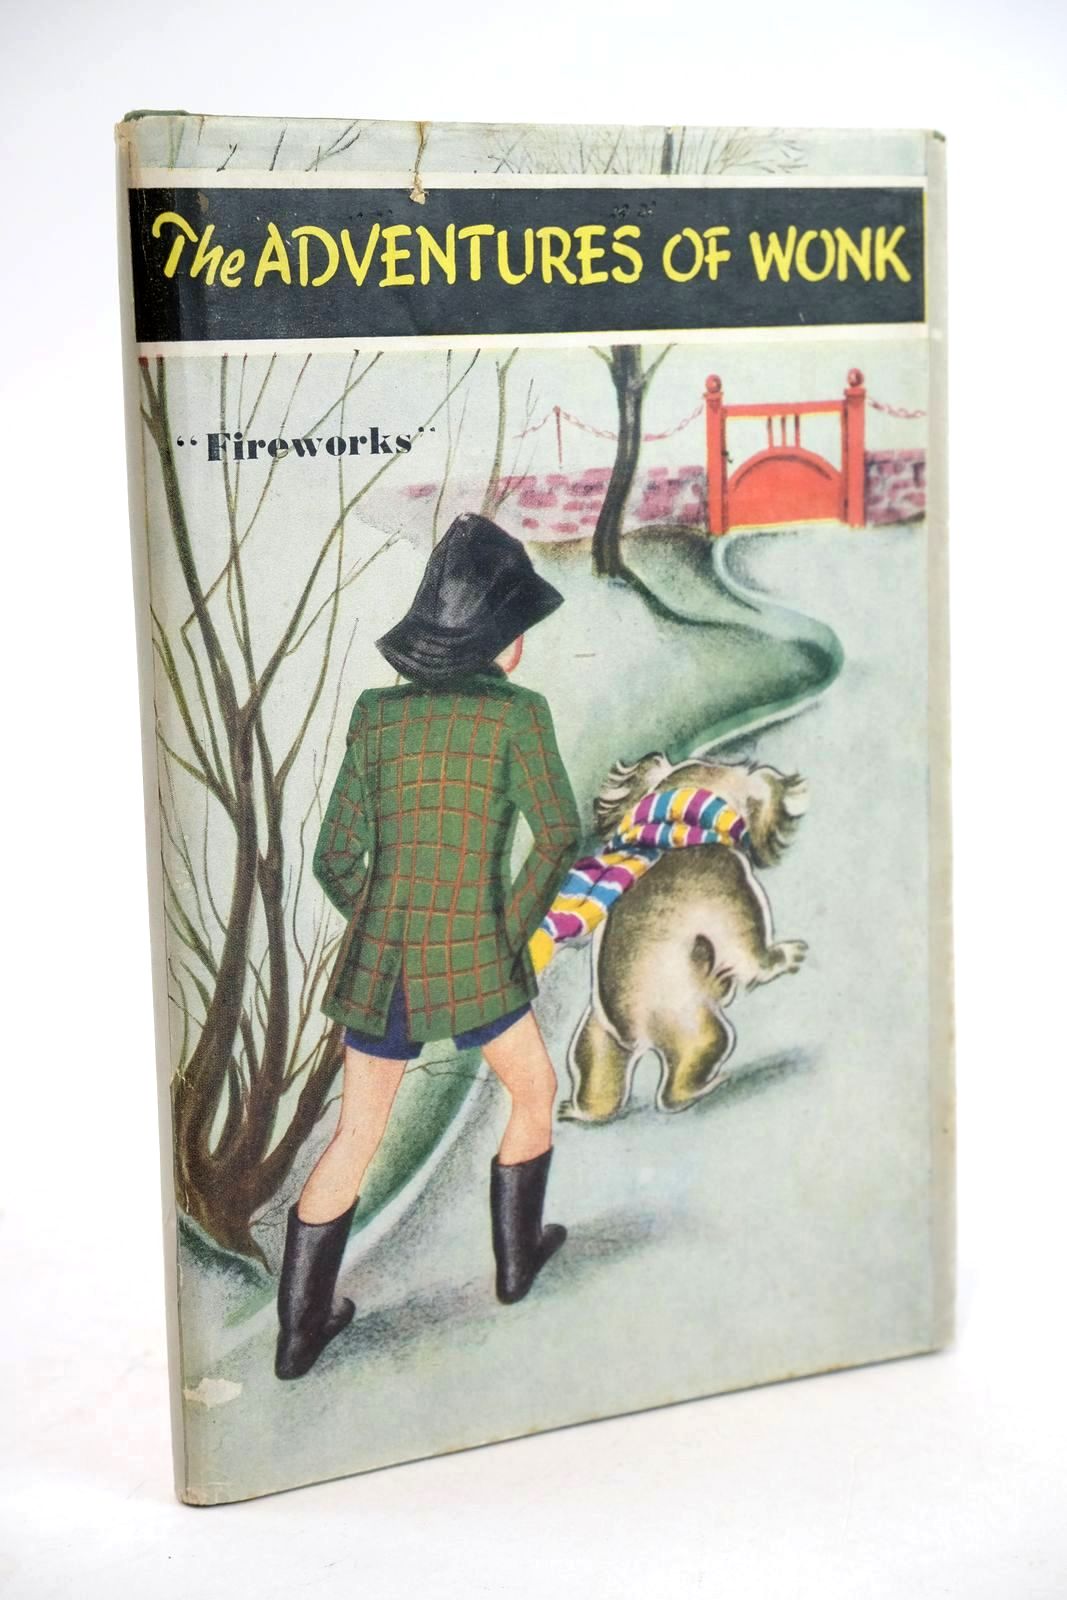 Photo of THE ADVENTURES OF WONK - FIREWORKS written by Levy, Muriel illustrated by Kiddell-Monroe, Joan published by Wills & Hepworth Ltd. (STOCK CODE: 1324391)  for sale by Stella & Rose's Books